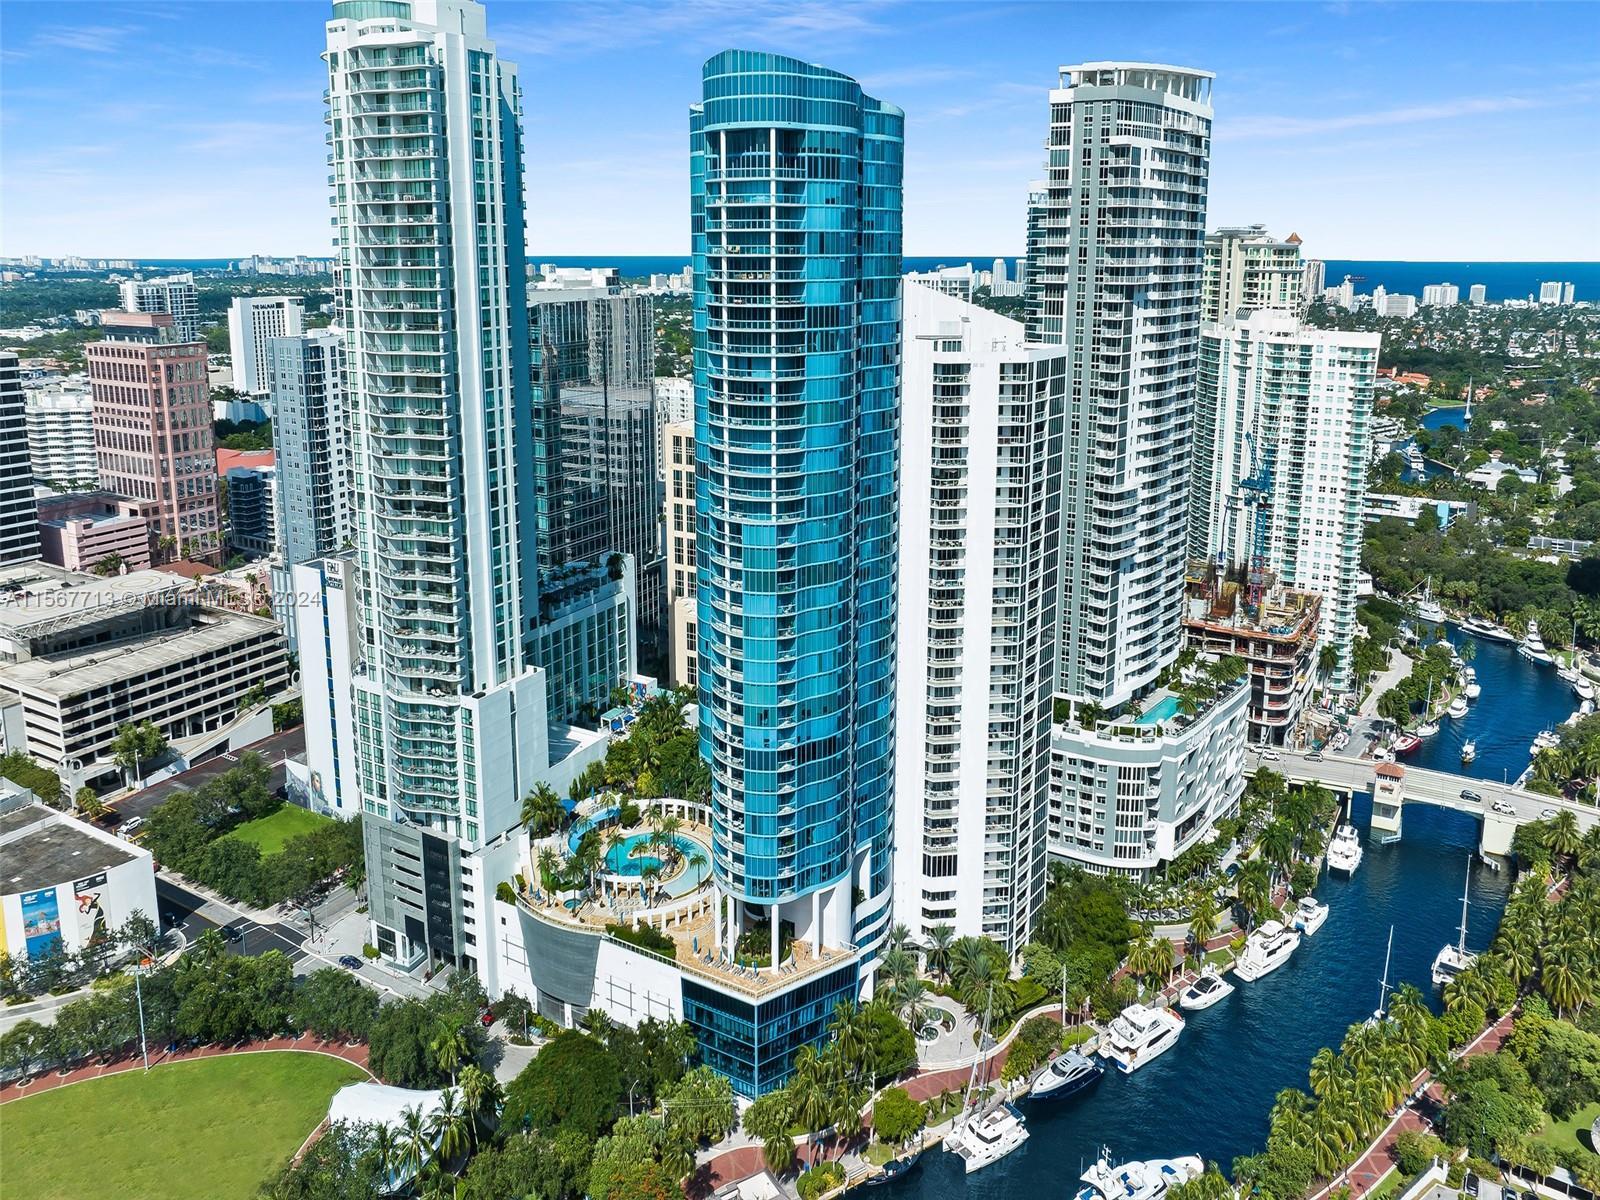 The Las Olas River House: 5-Star Luxury Living! The rarely available, 2141 SF Gramercy floor plan of